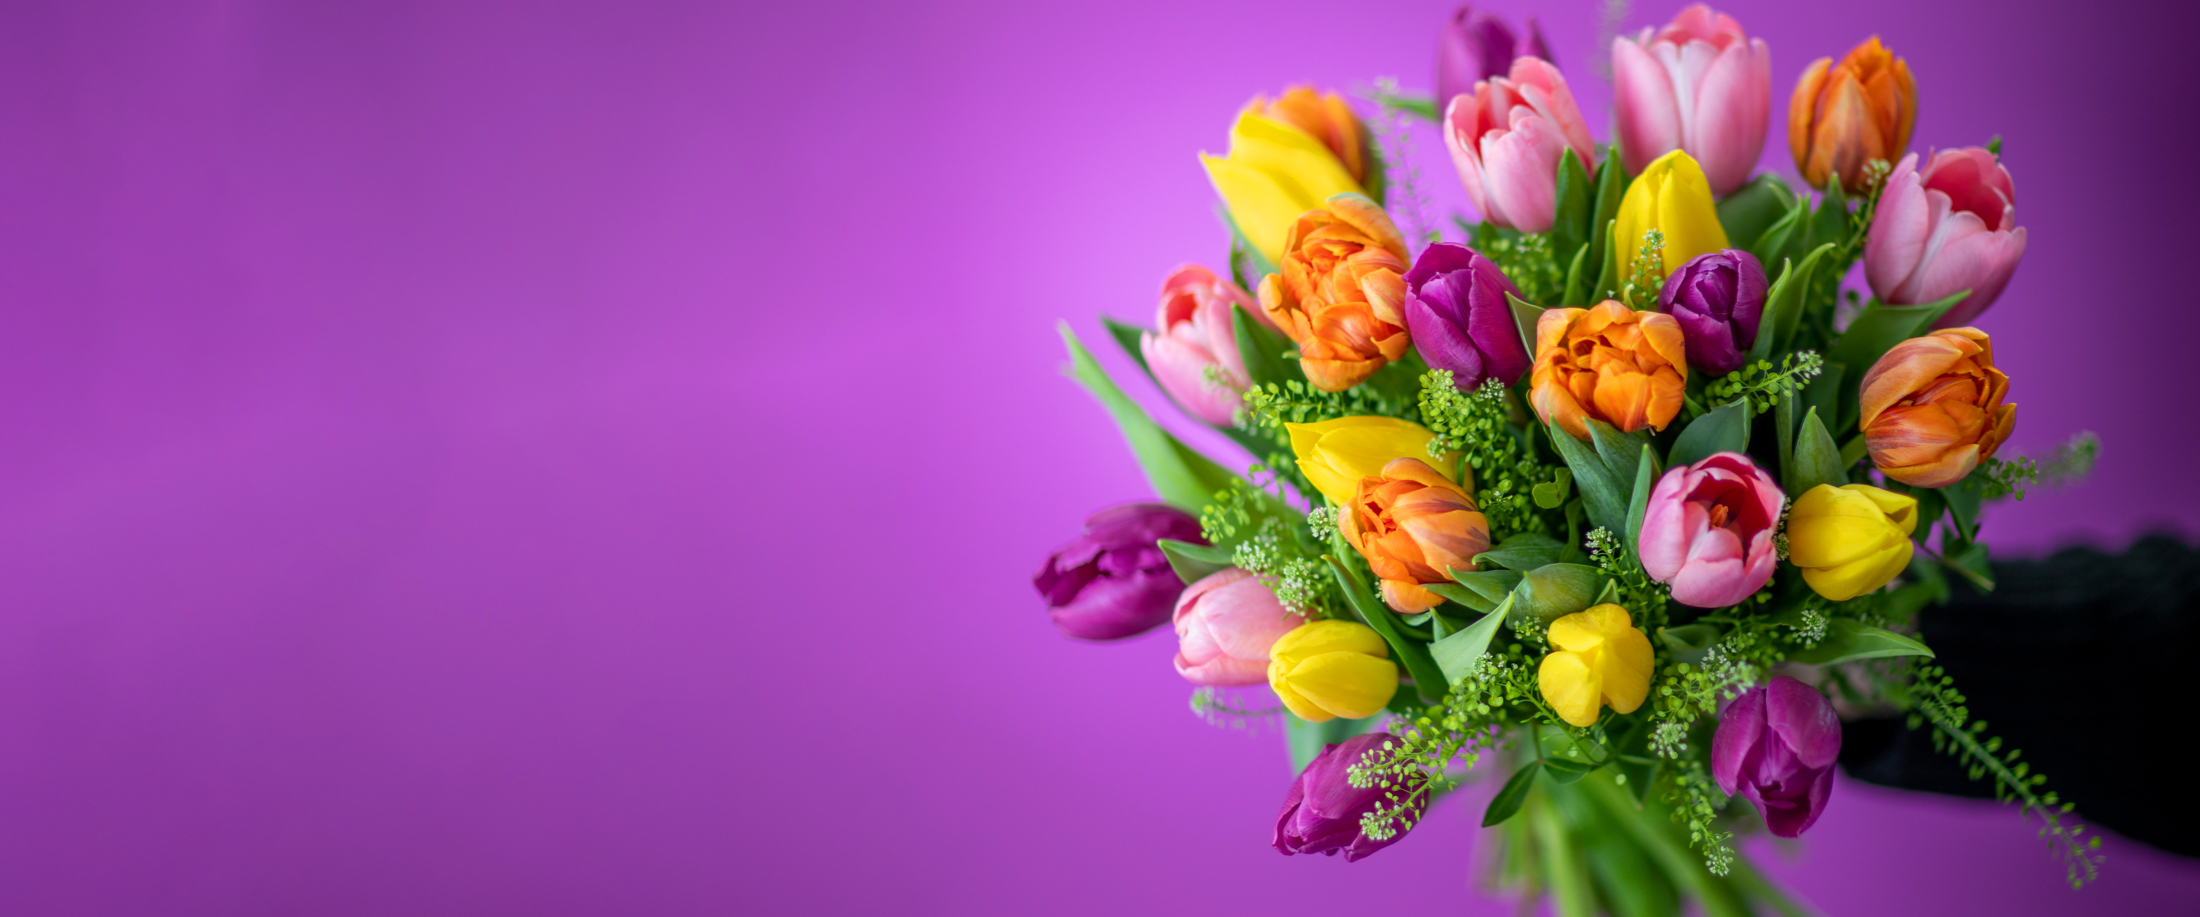 Send Flowers to Someone You Care About - Freddie's Flowers